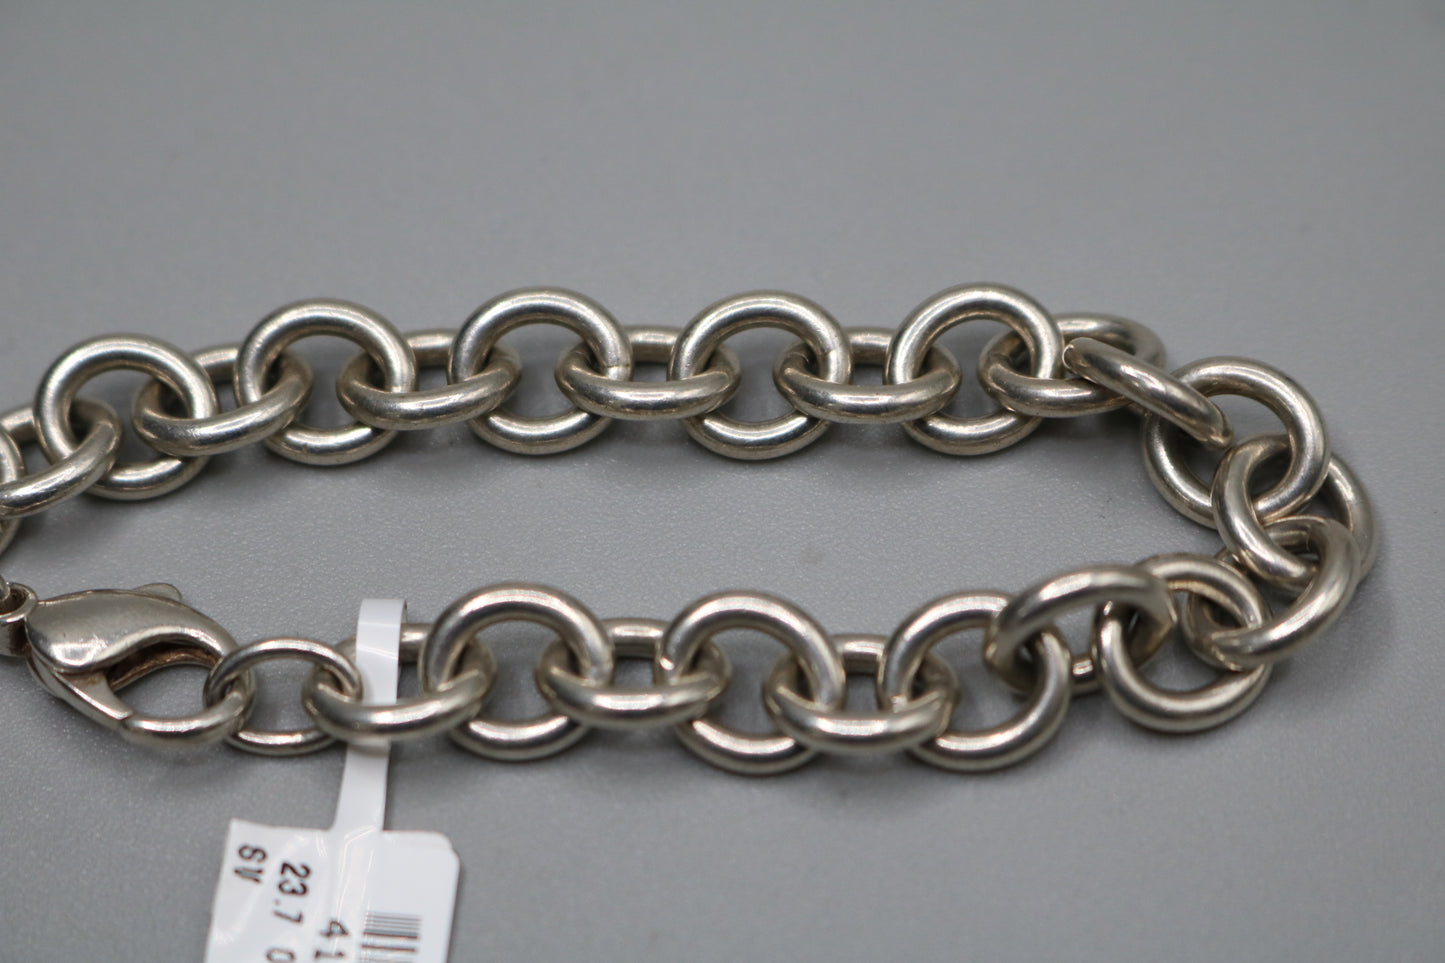 Tiffany & Co. Please Return To Tiffany & Co Round Charm Sterling Silver Bracelet (7.5 Inches)